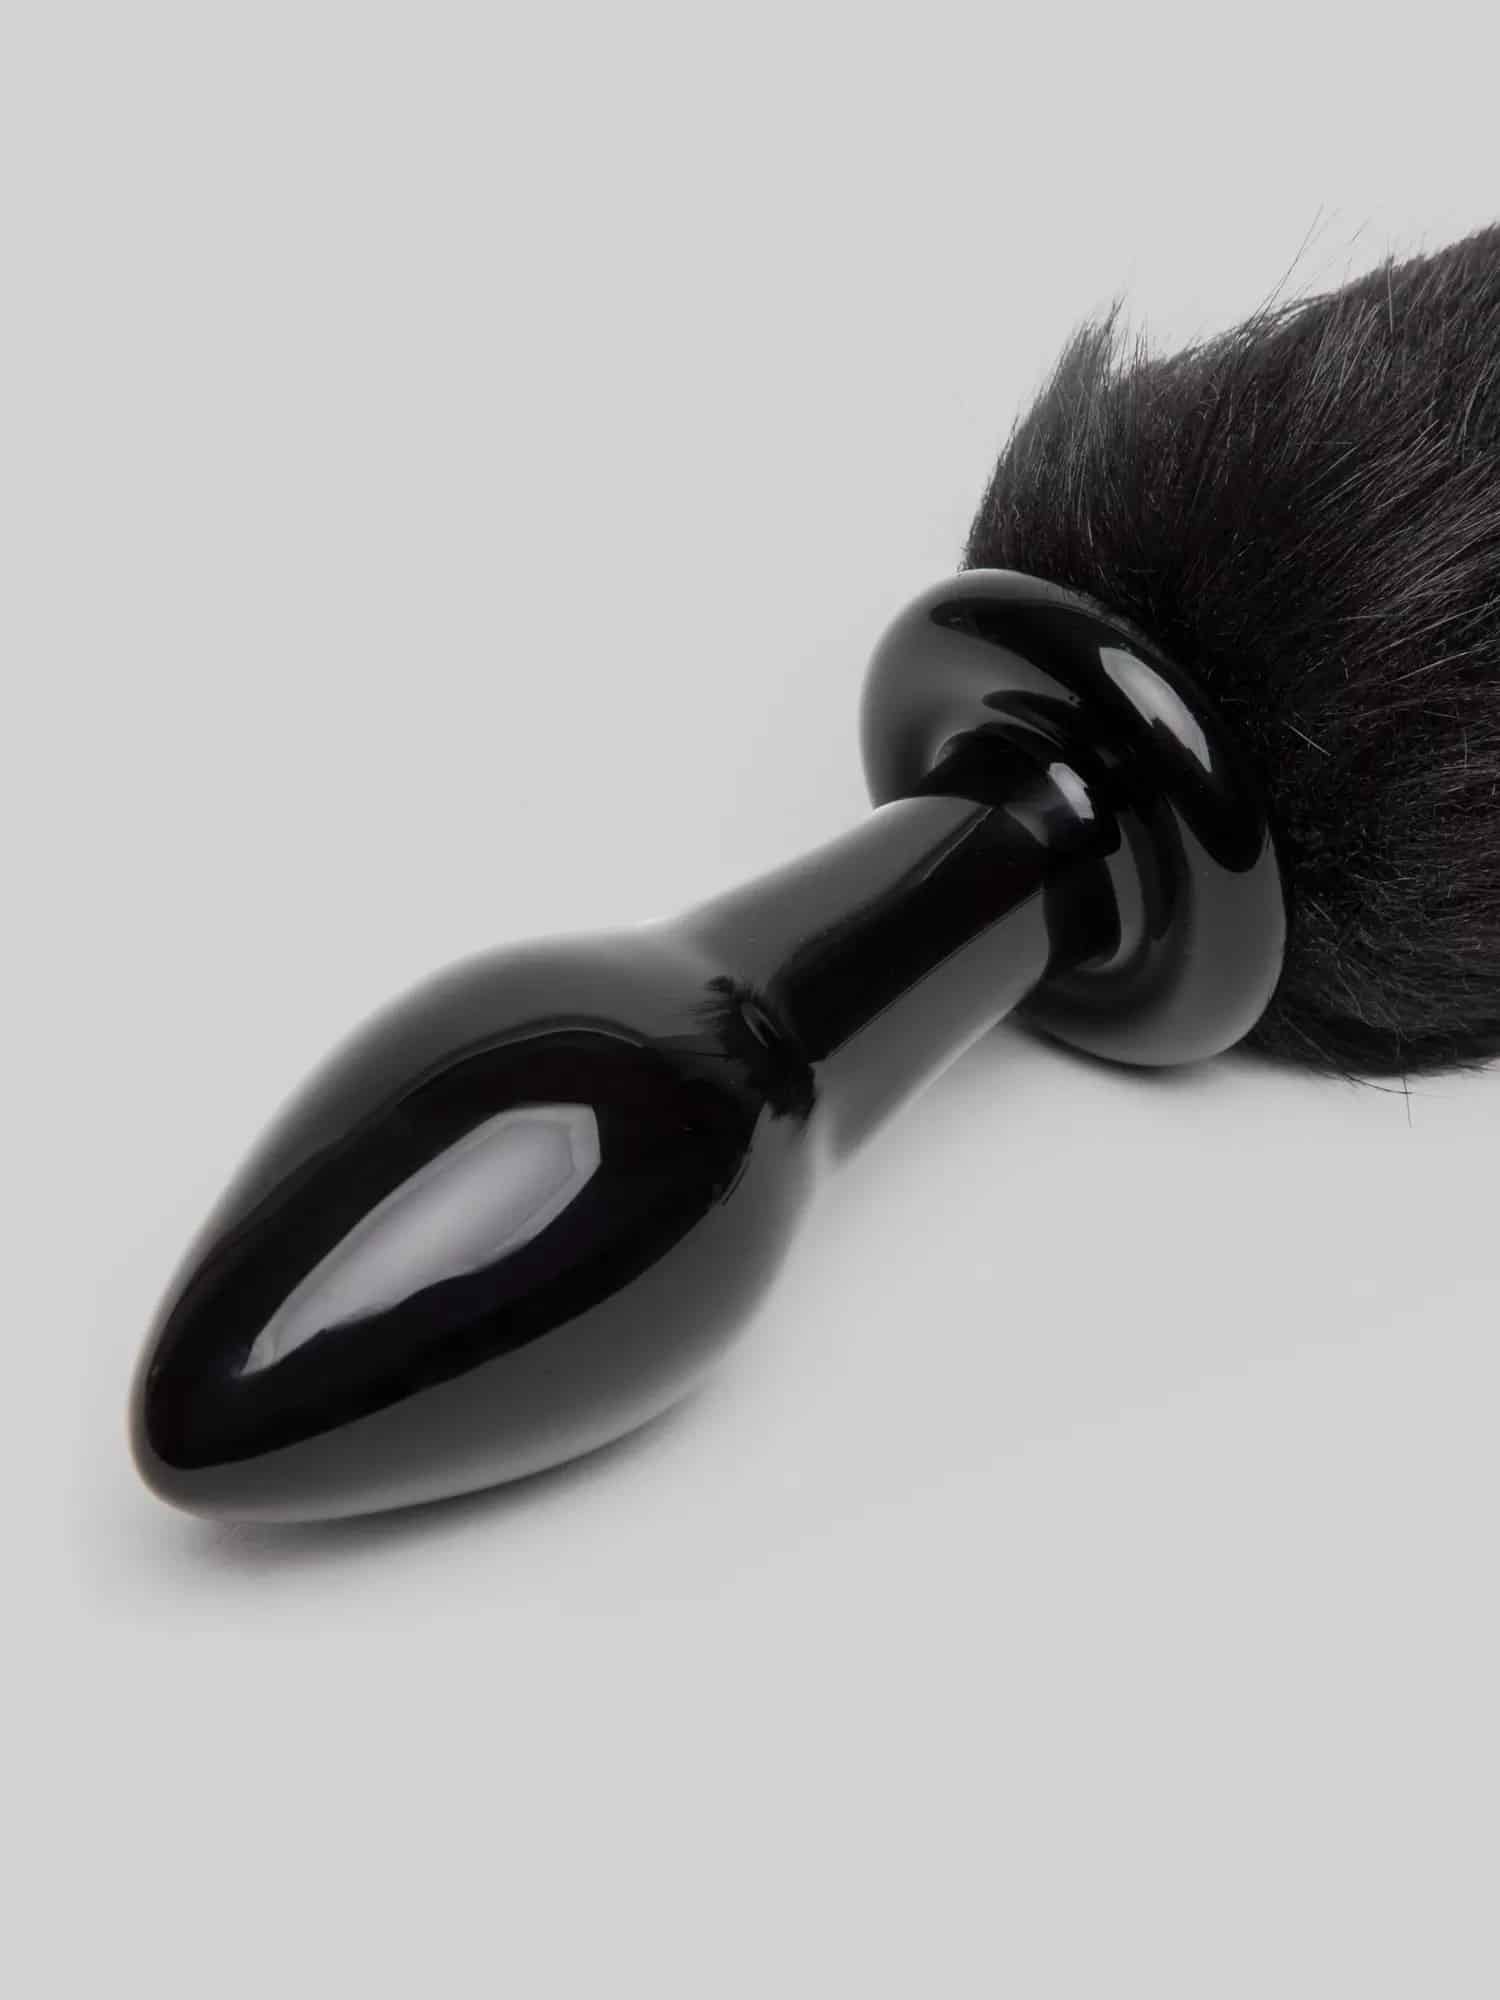 Dominix Deluxe Glass Animal Tail Butt Plug. Slide 2